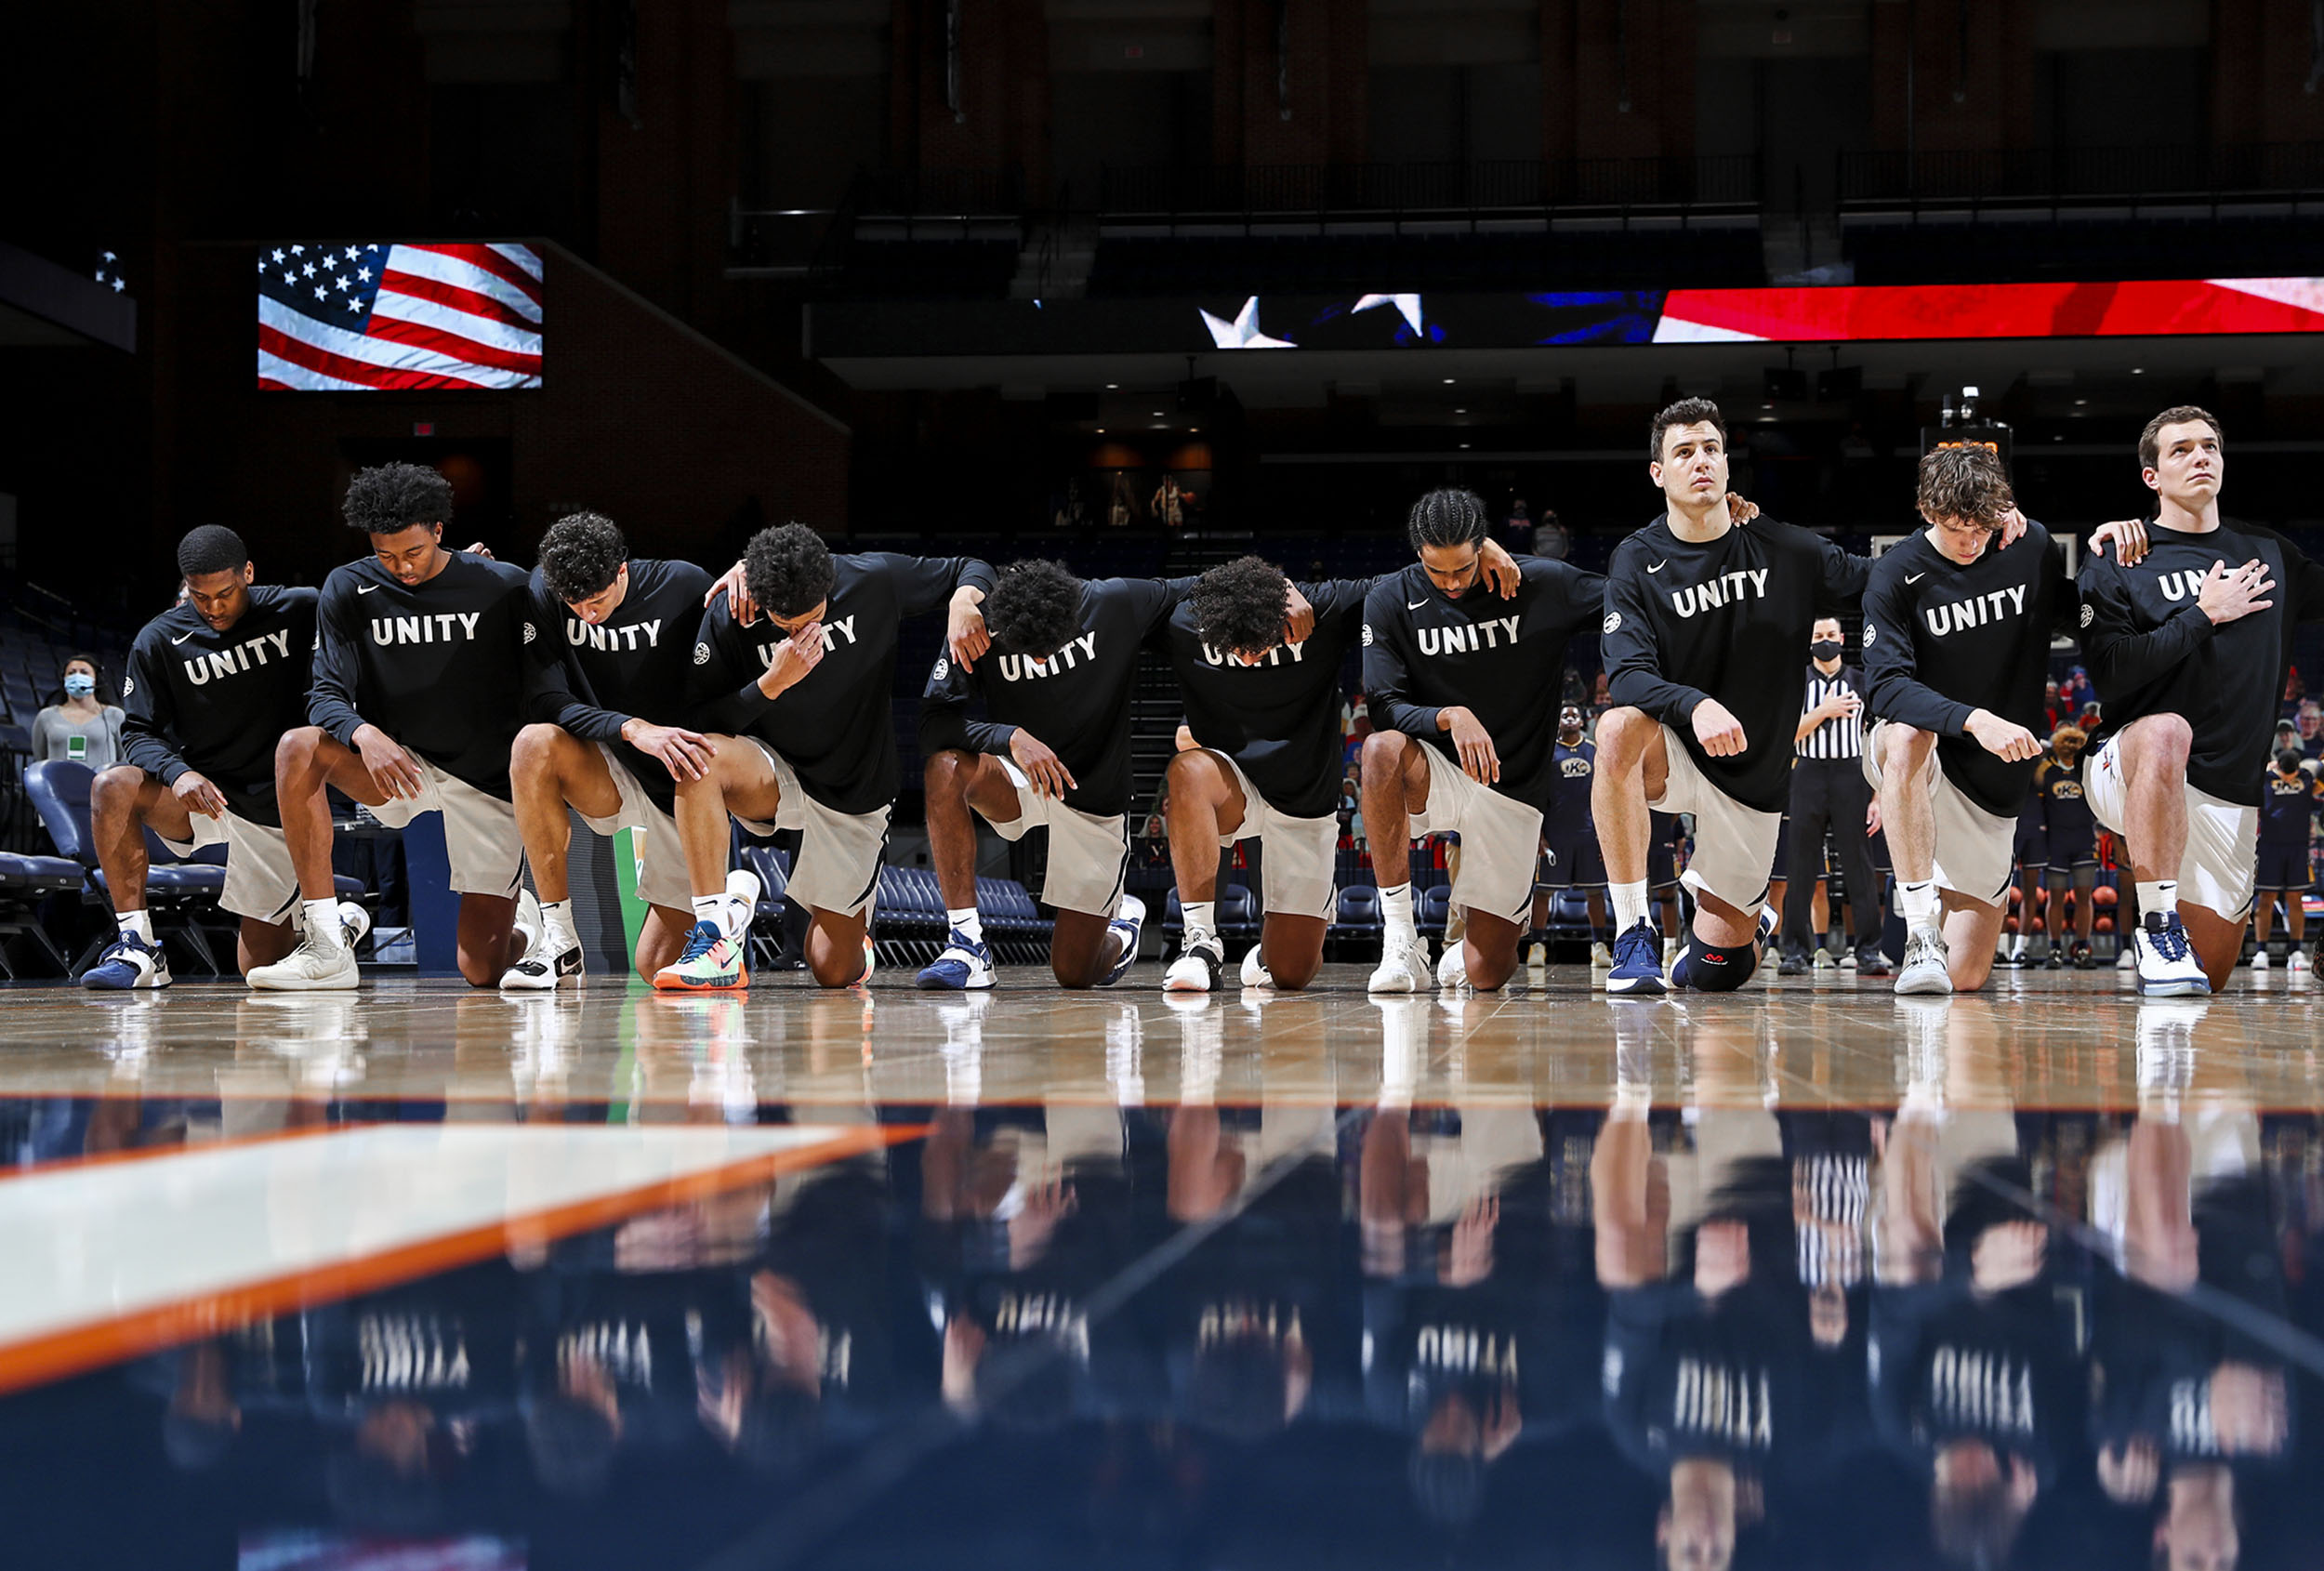 UVA mens basketball team kneel doing the national anthem while bowing their heads except the last player in line(right), he is kneeling but head raised and hand over heart